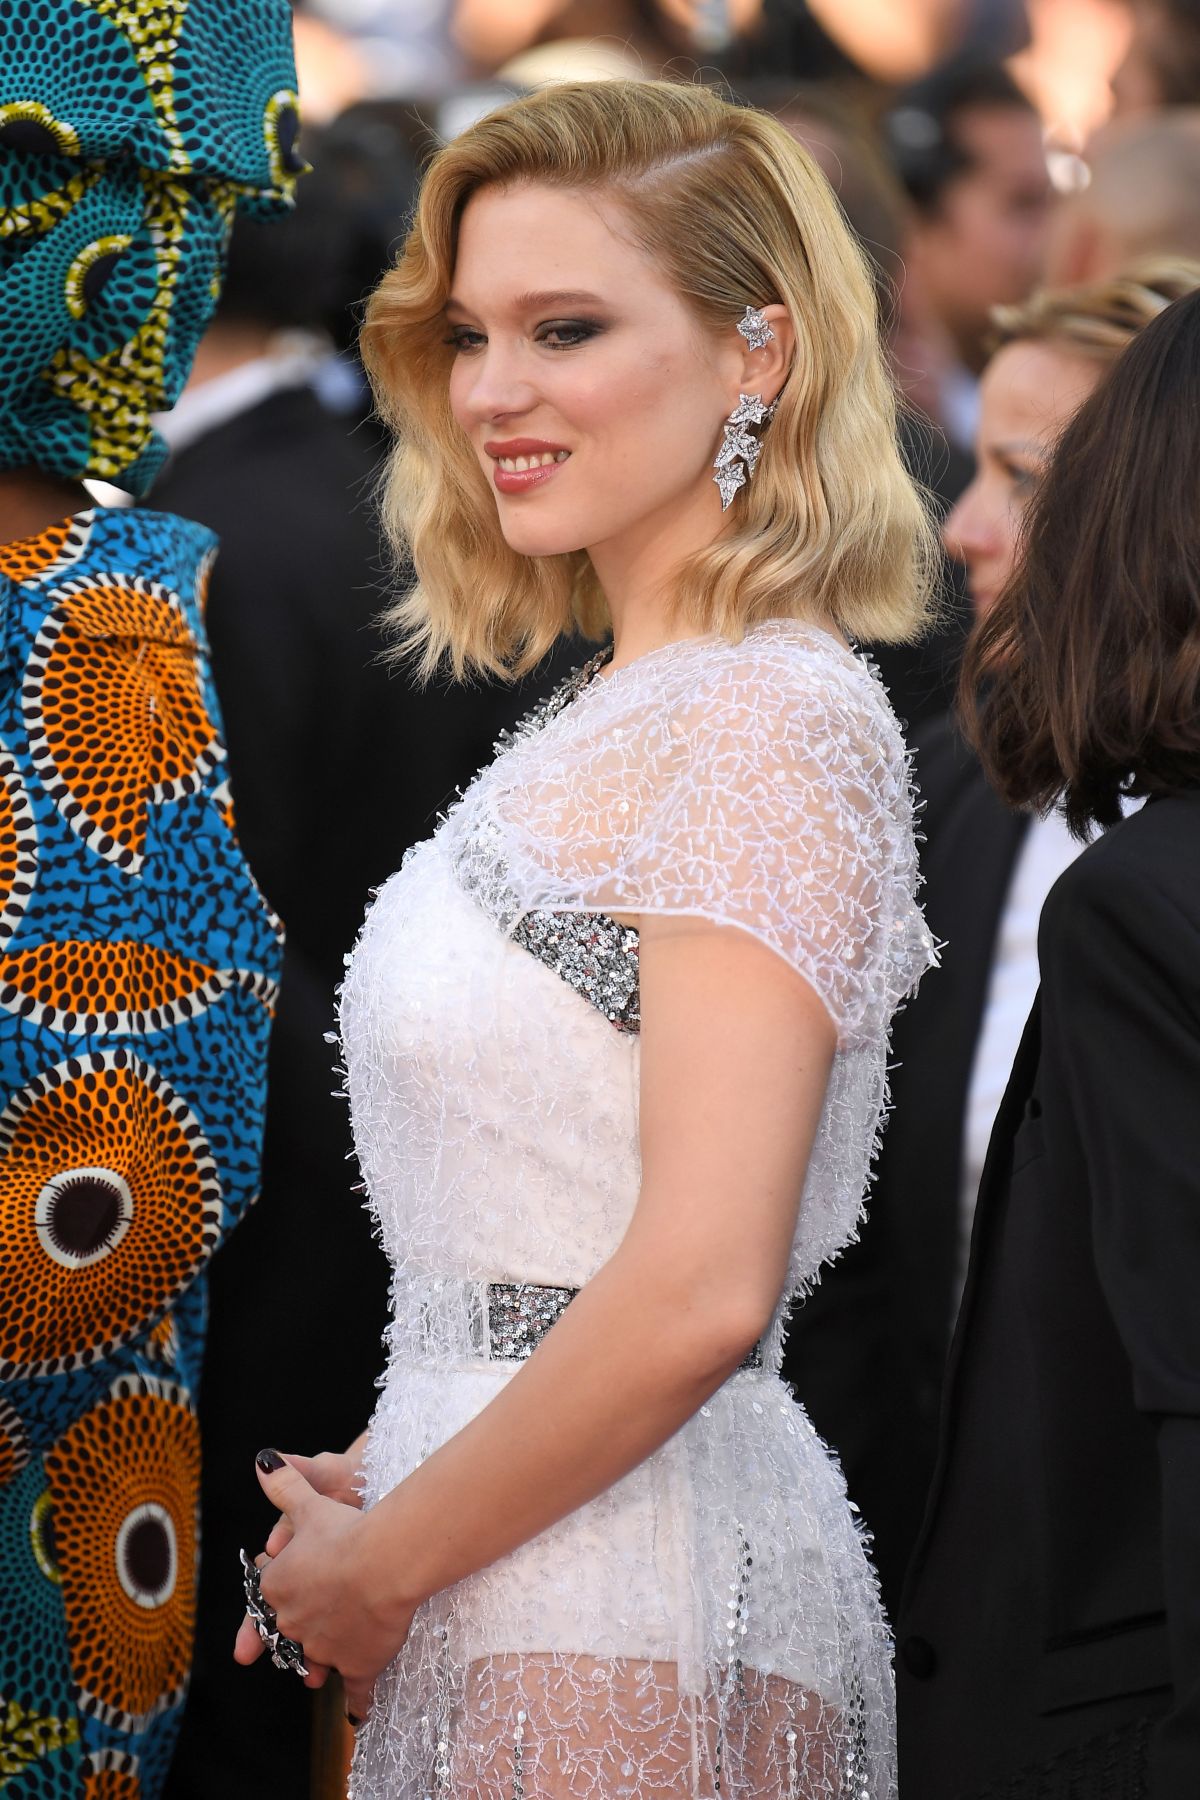 CANNES, FRANCE – MAY 19, 2018: Lea Seydoux moments before walking